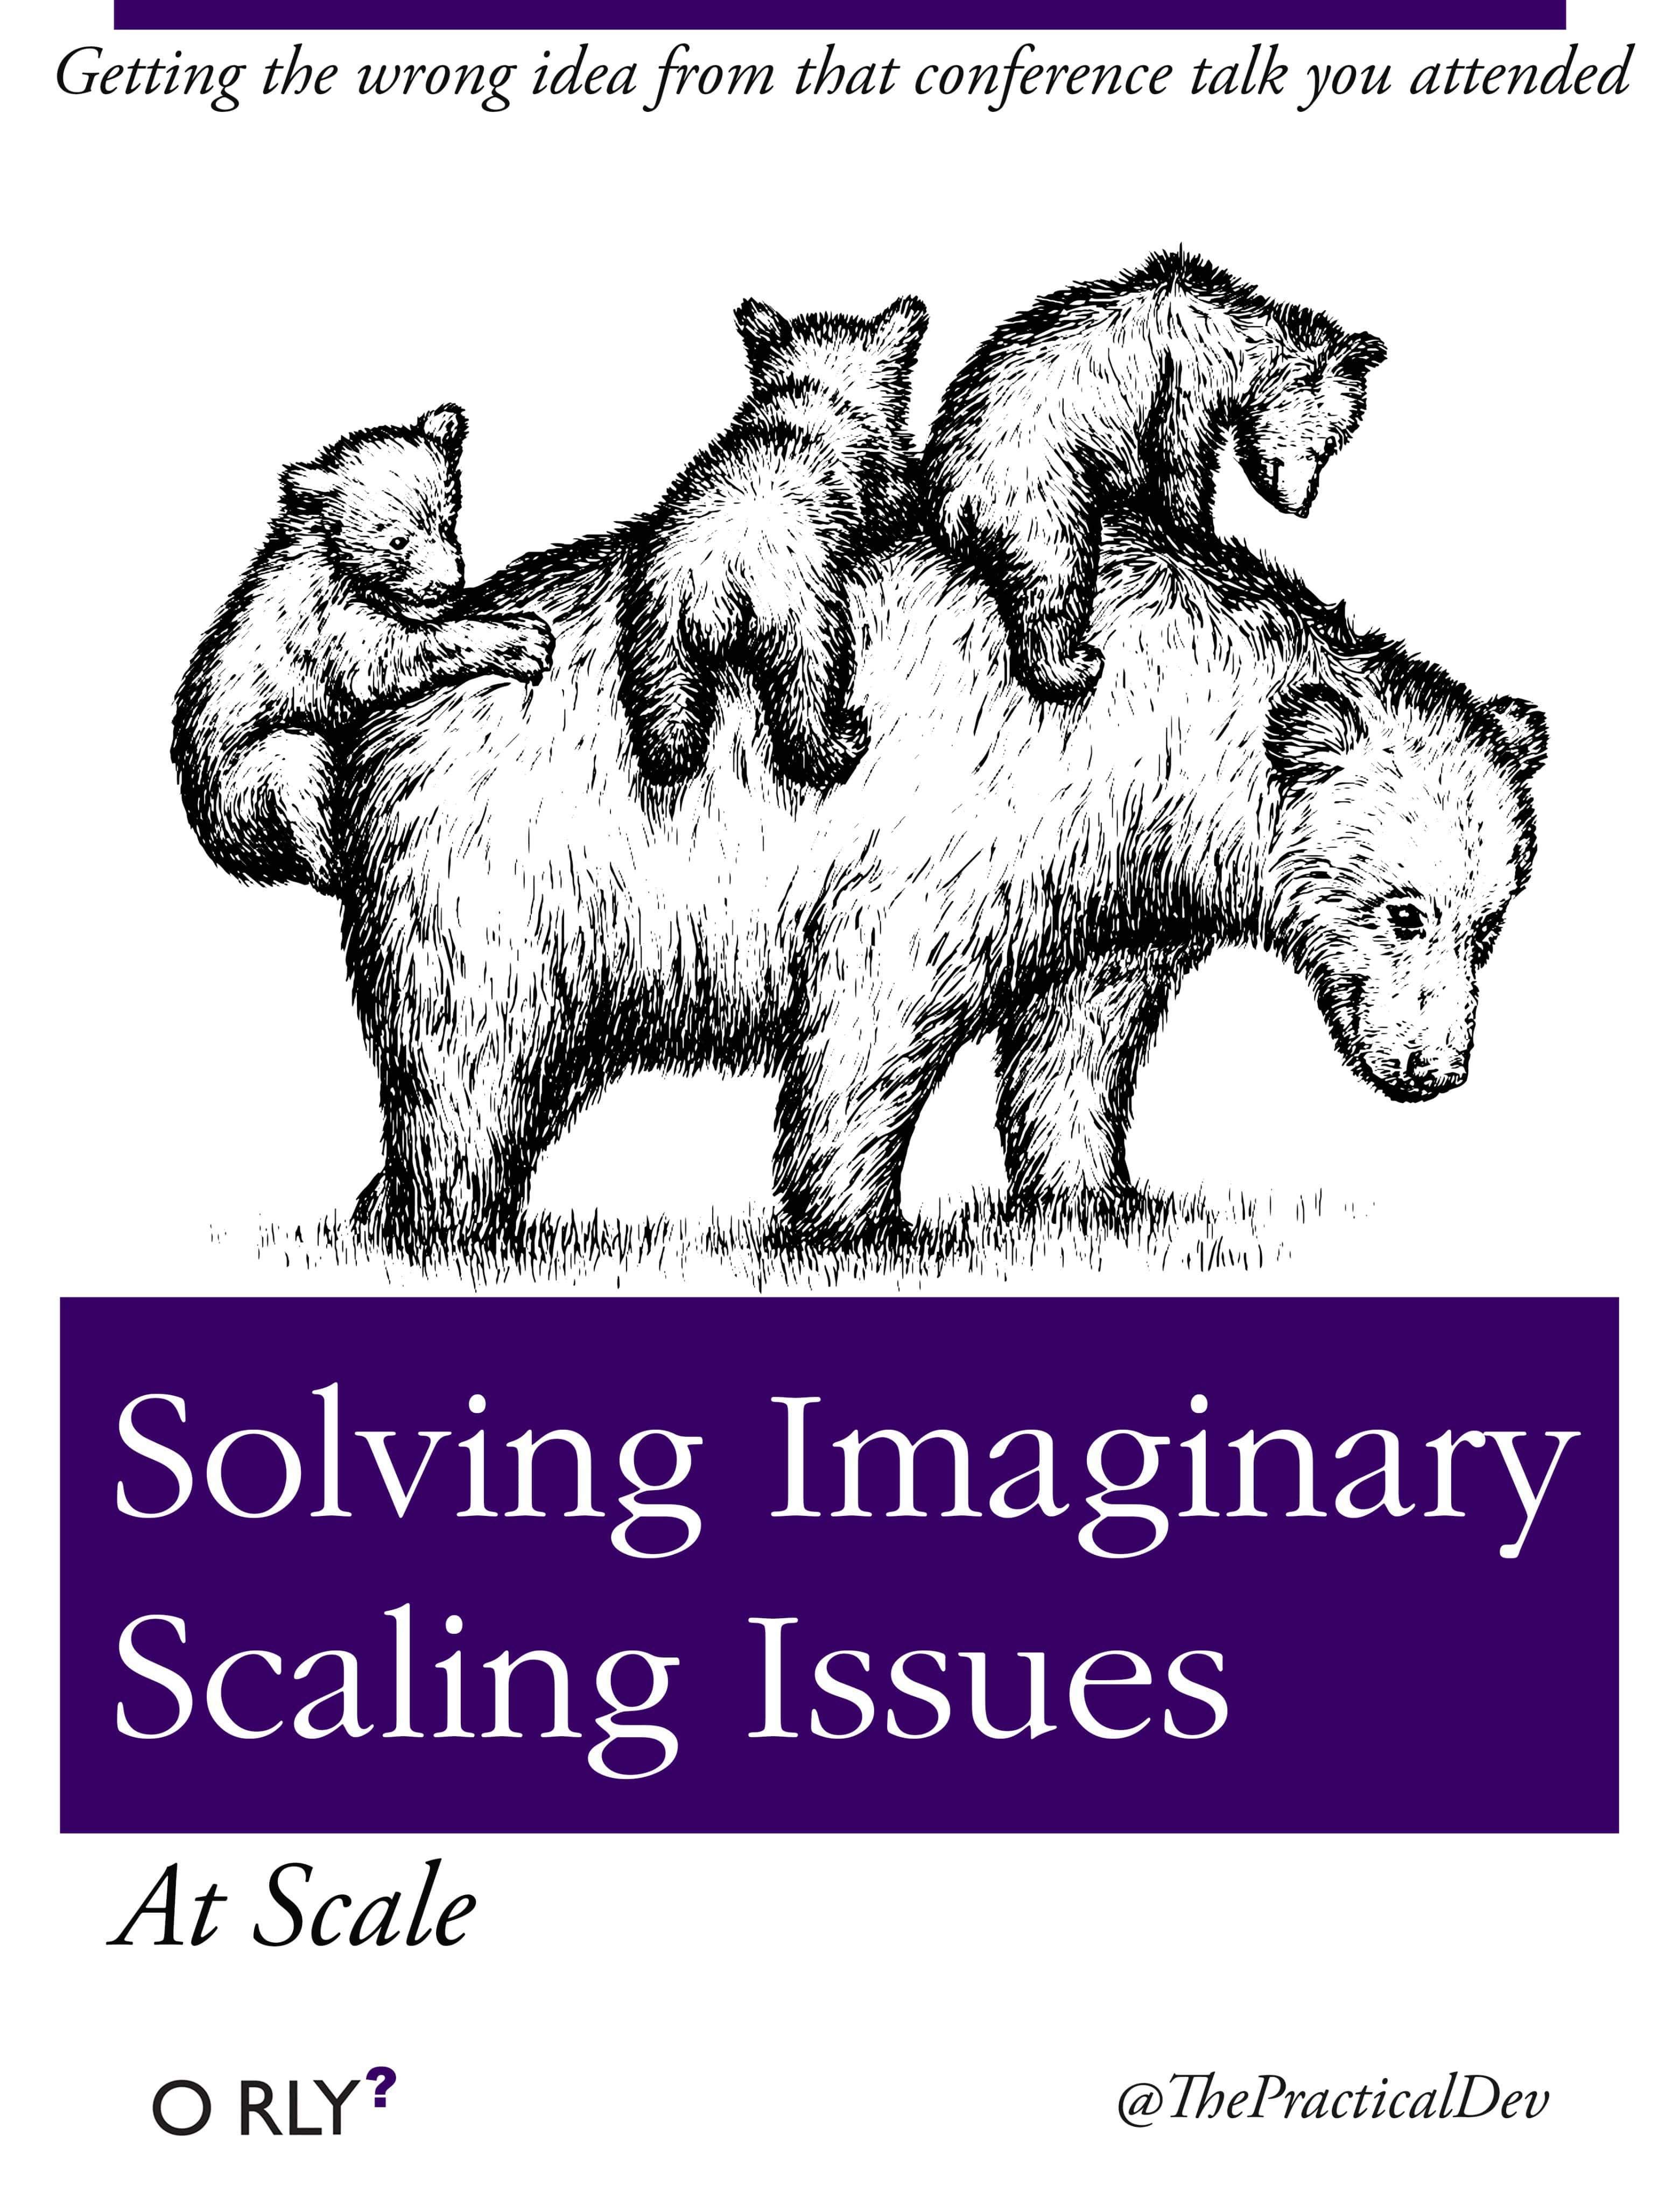 A fake textbook called Solving Imaginary Scaling Issues At Scale